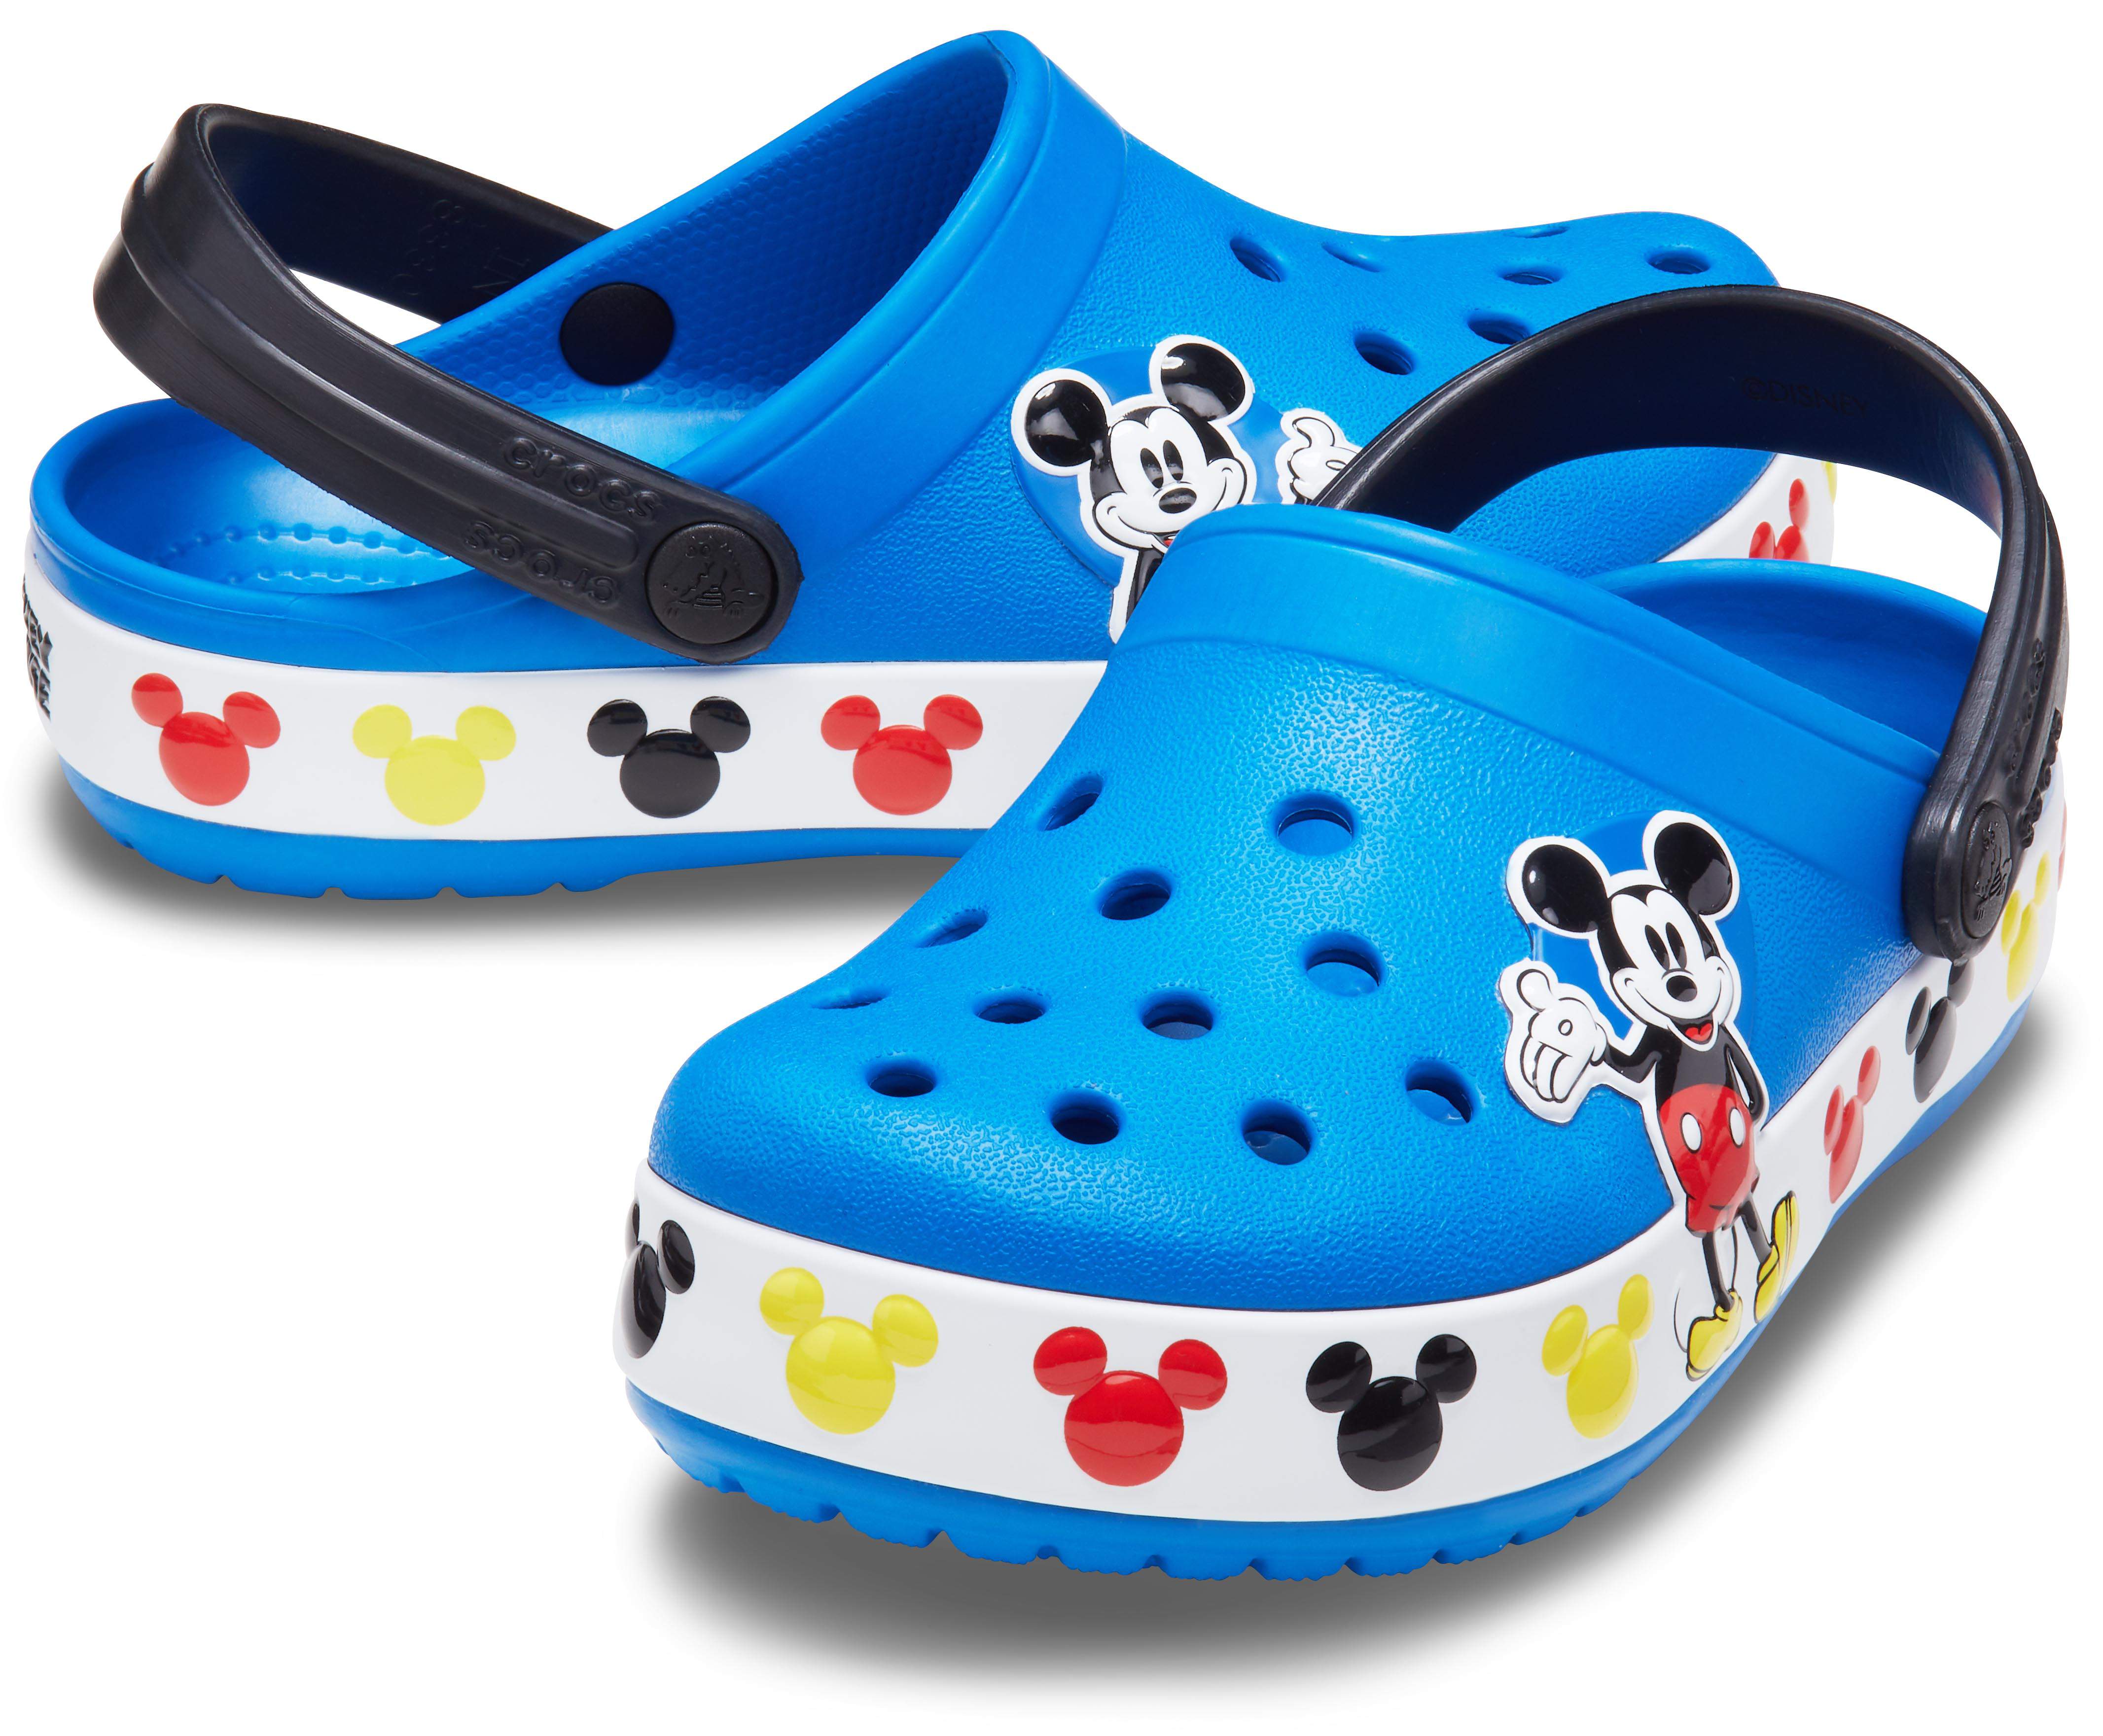 baby mickey mouse crocs